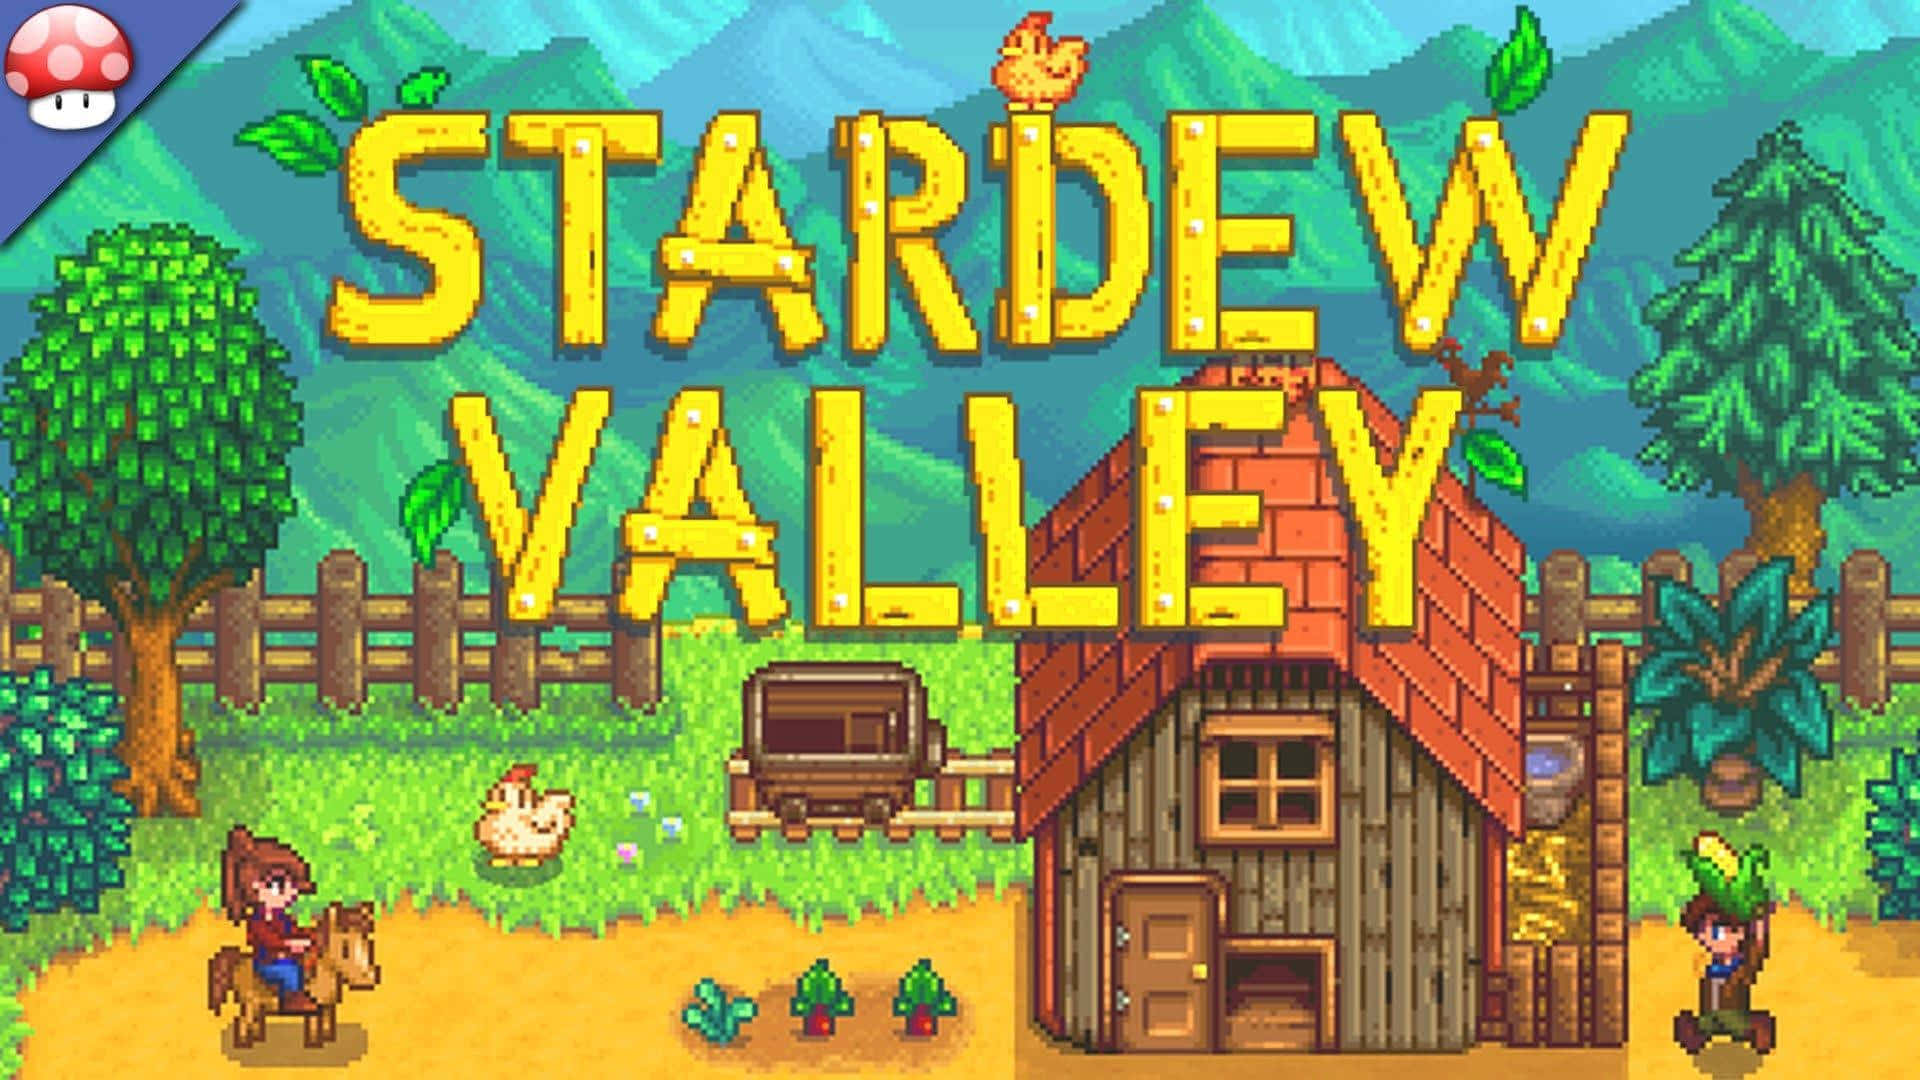 Embrace the simple life in Stardew Valley